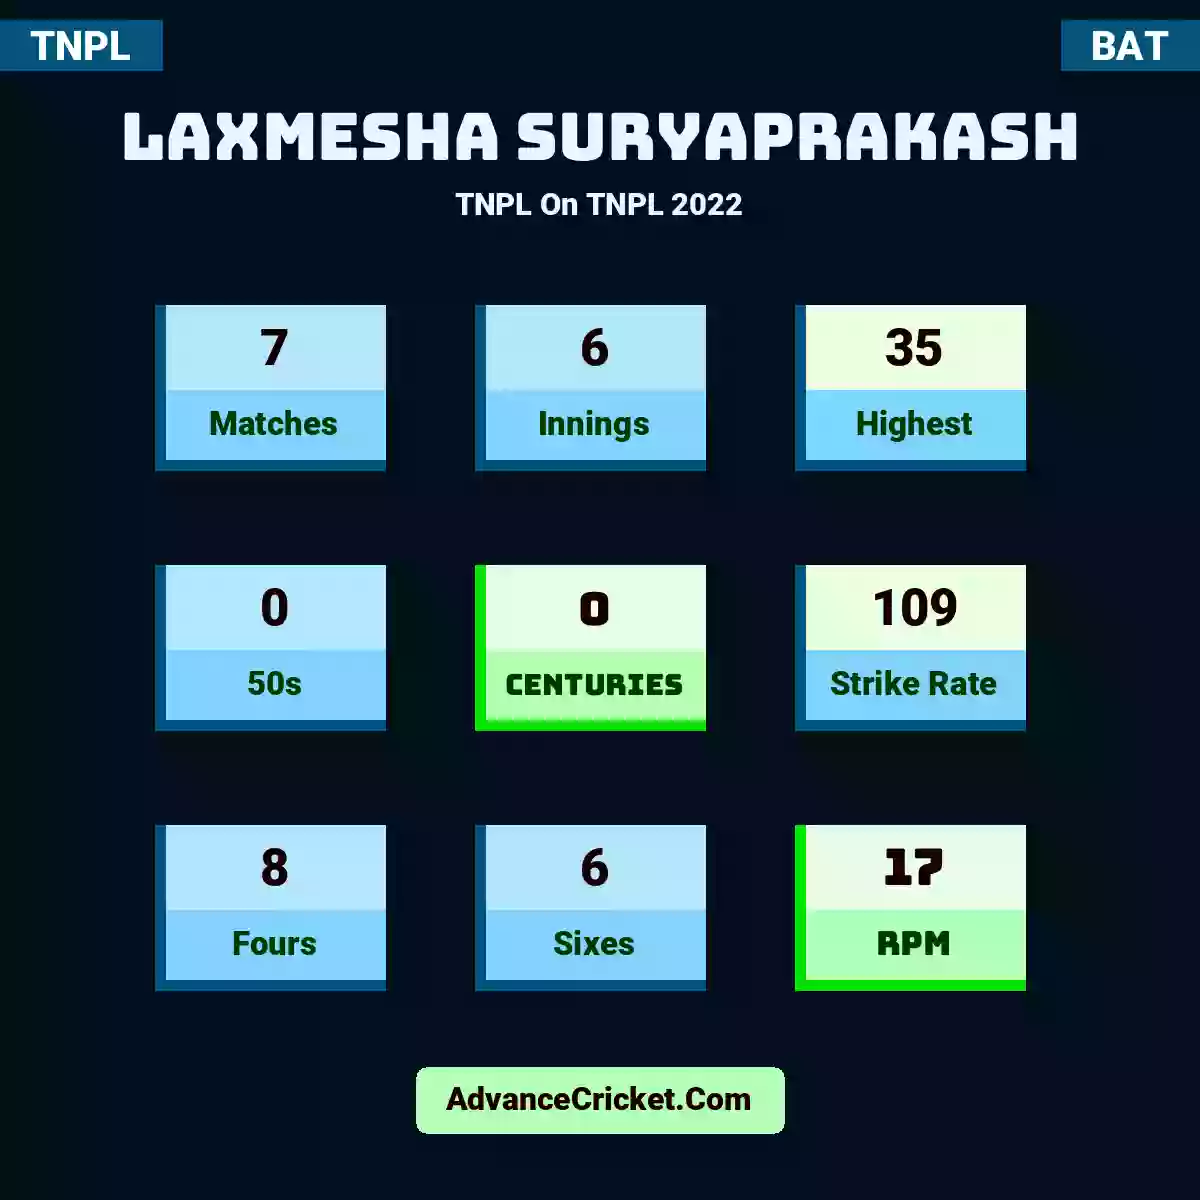 Laxmesha Suryaprakash TNPL  On TNPL 2022, Laxmesha Suryaprakash played 7 matches, scored 35 runs as highest, 0 half-centuries, and 0 centuries, with a strike rate of 109. L.Suryaprakash hit 8 fours and 6 sixes, with an RPM of 17.